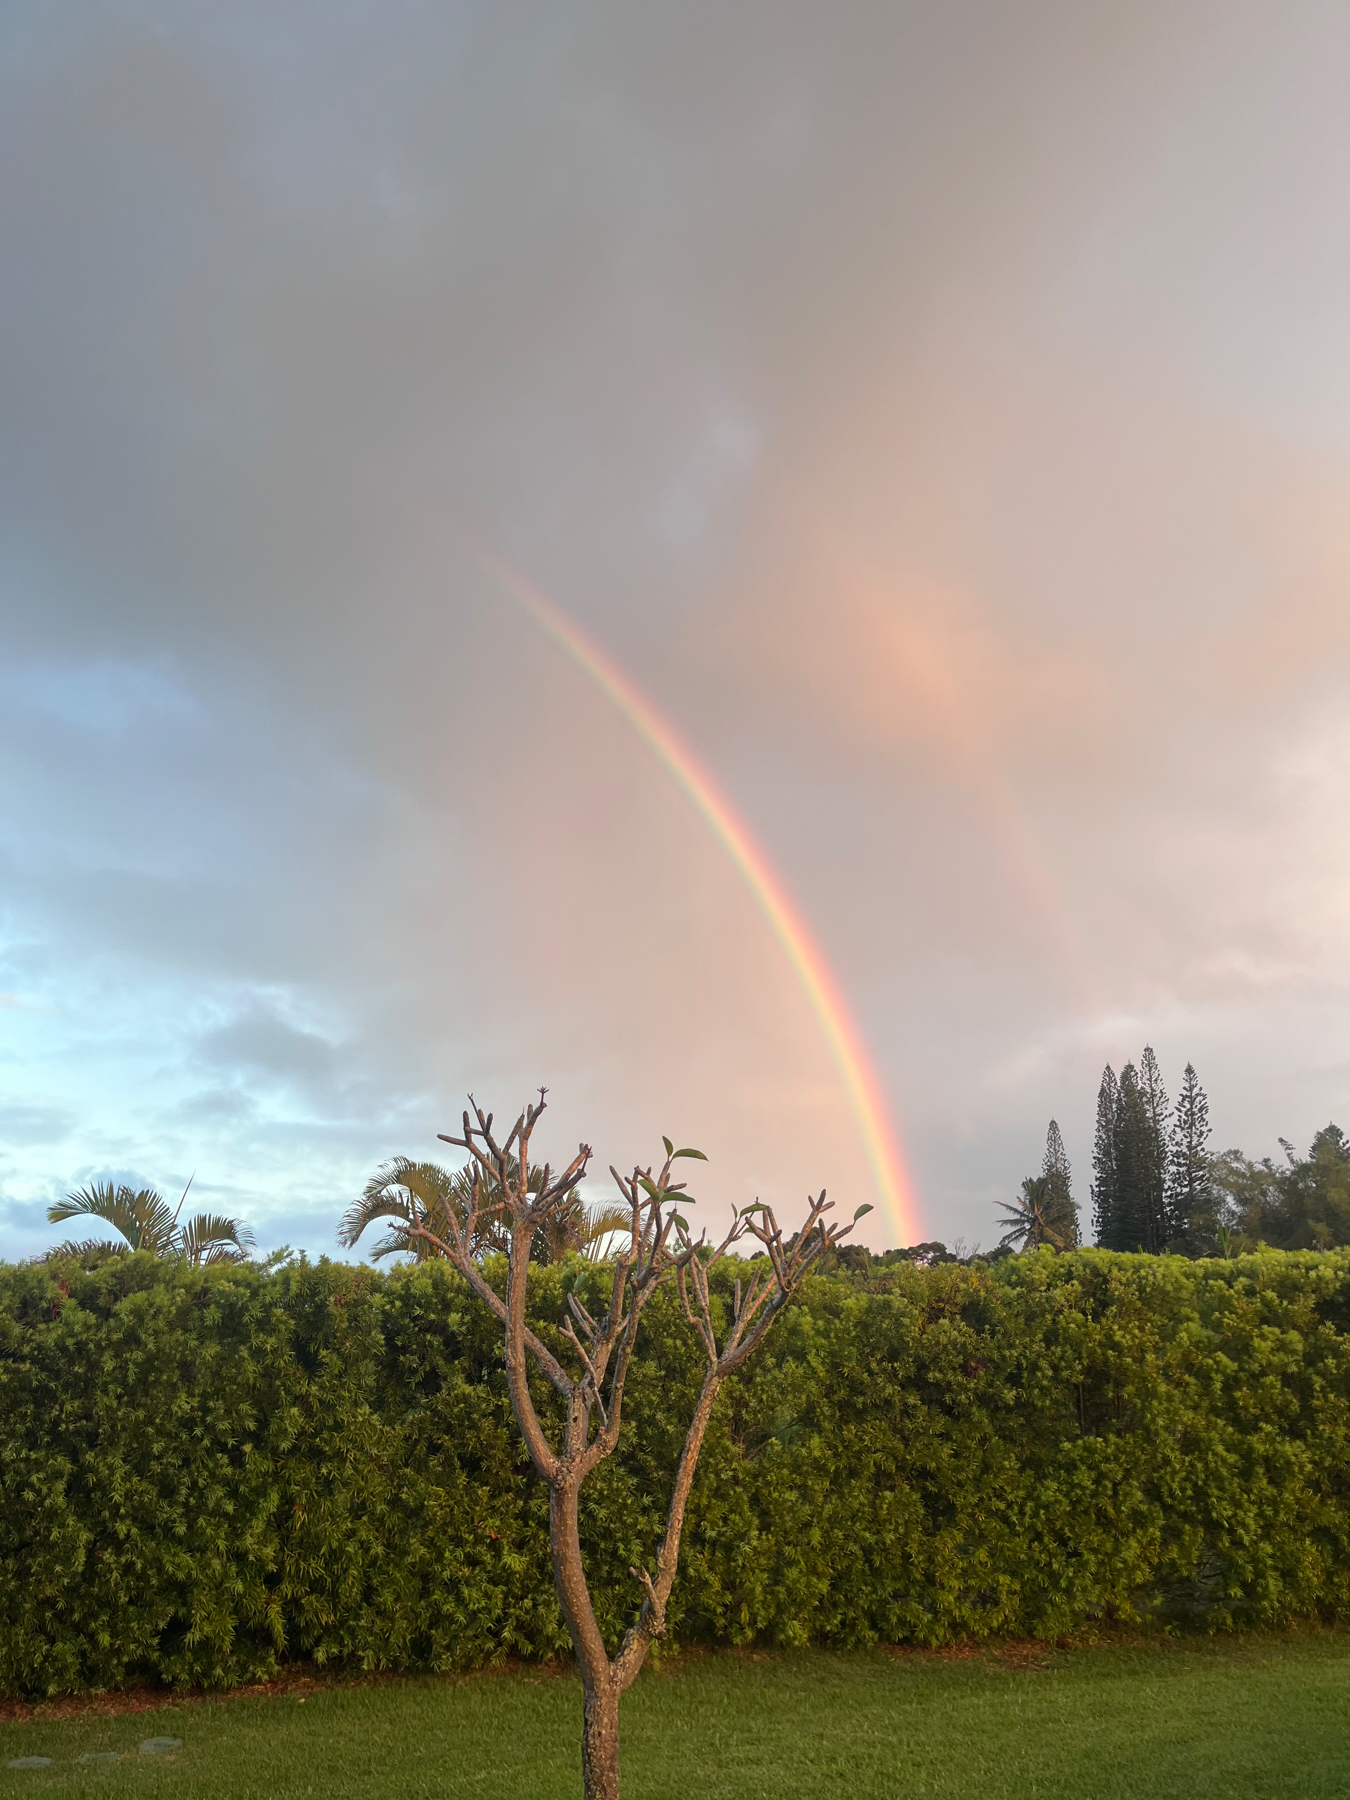 A vibrant rainbow arcs across a cloudy sky at sunset, above a trimmed hedge and a leafless tree in the foreground.